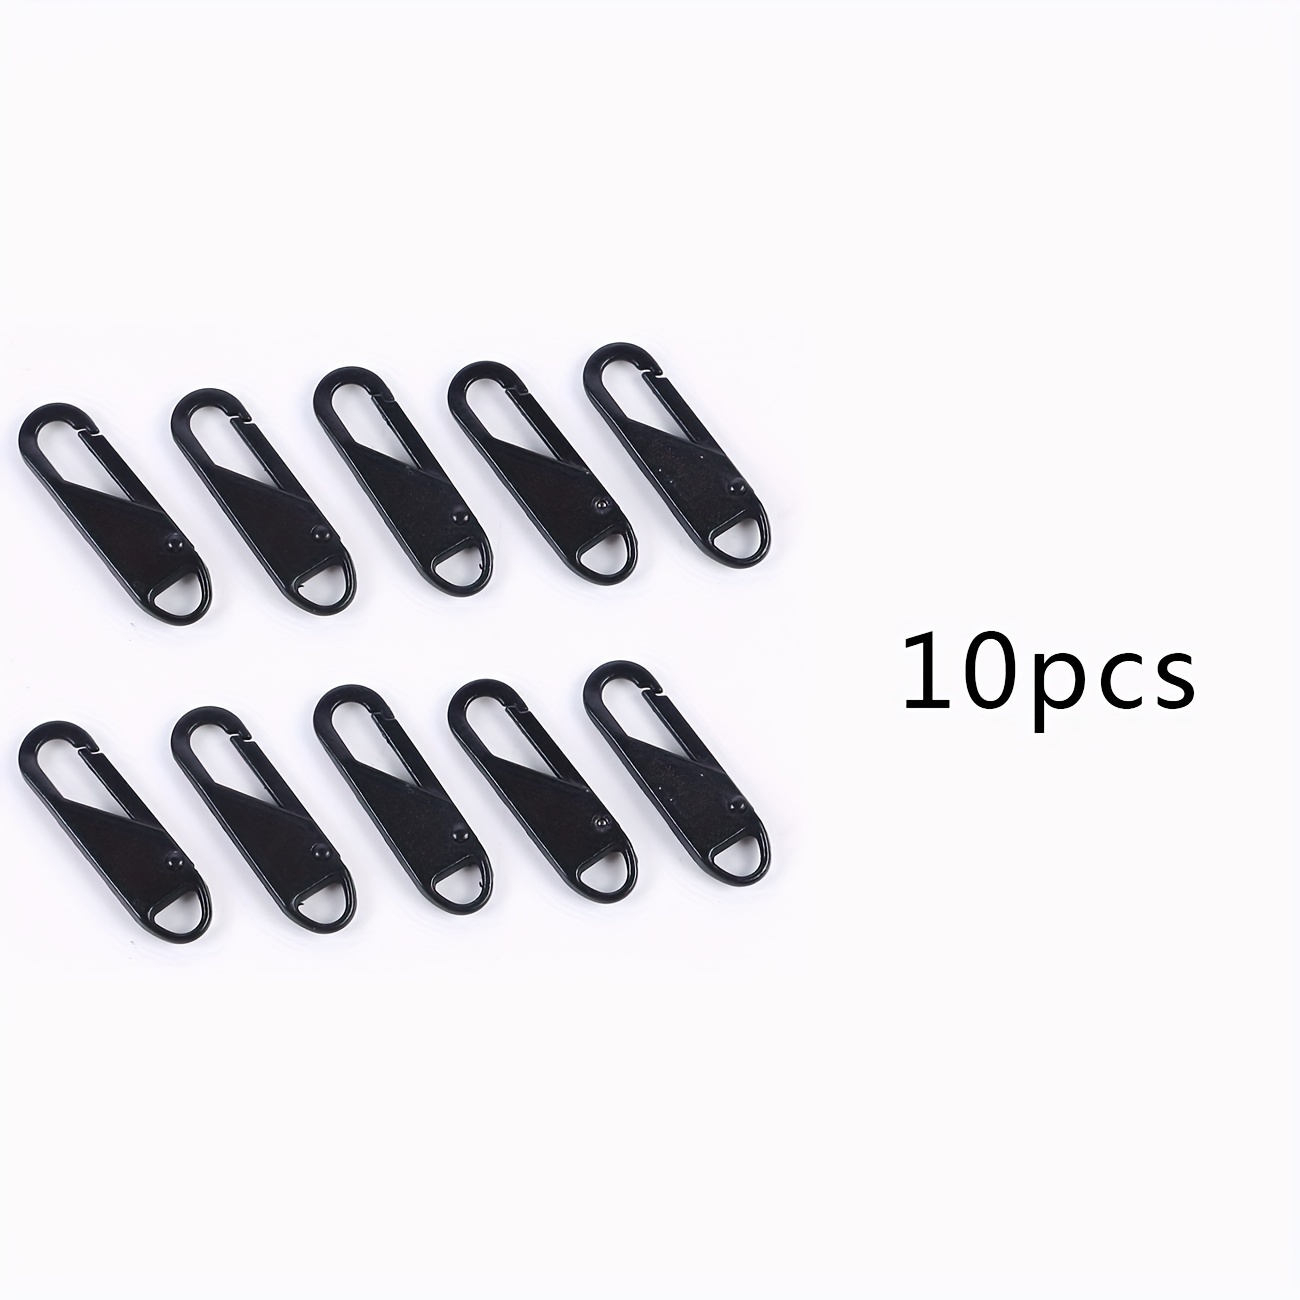  Zipper Pull, Universal Zipper Pull Replacement Kit, Removable Zipper  Pulls Tab Replacement (20 Pcs), Black Zipper Pulls for Jackets, Luggage,  Backpacks, Purses, Boots, Pants, Tents, (3 Styles 4 Sizes)